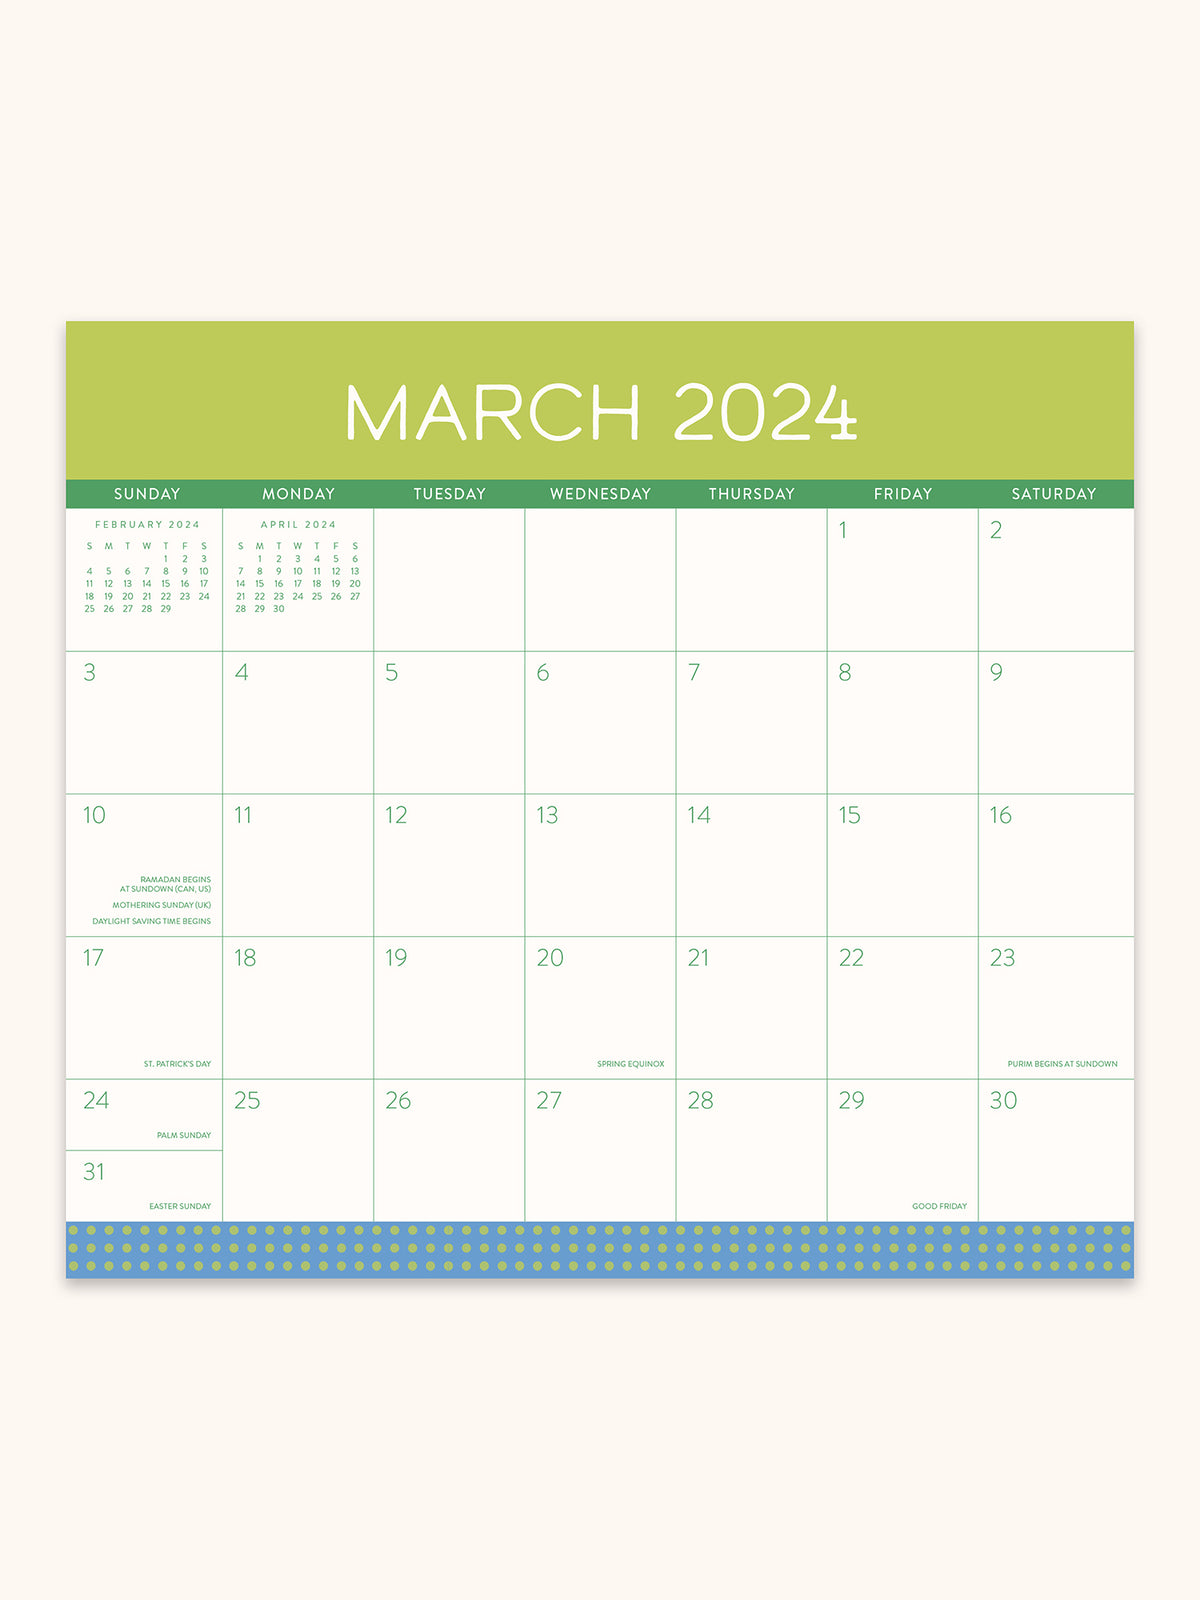 2024 Color Block Magnetic Monthly Pad